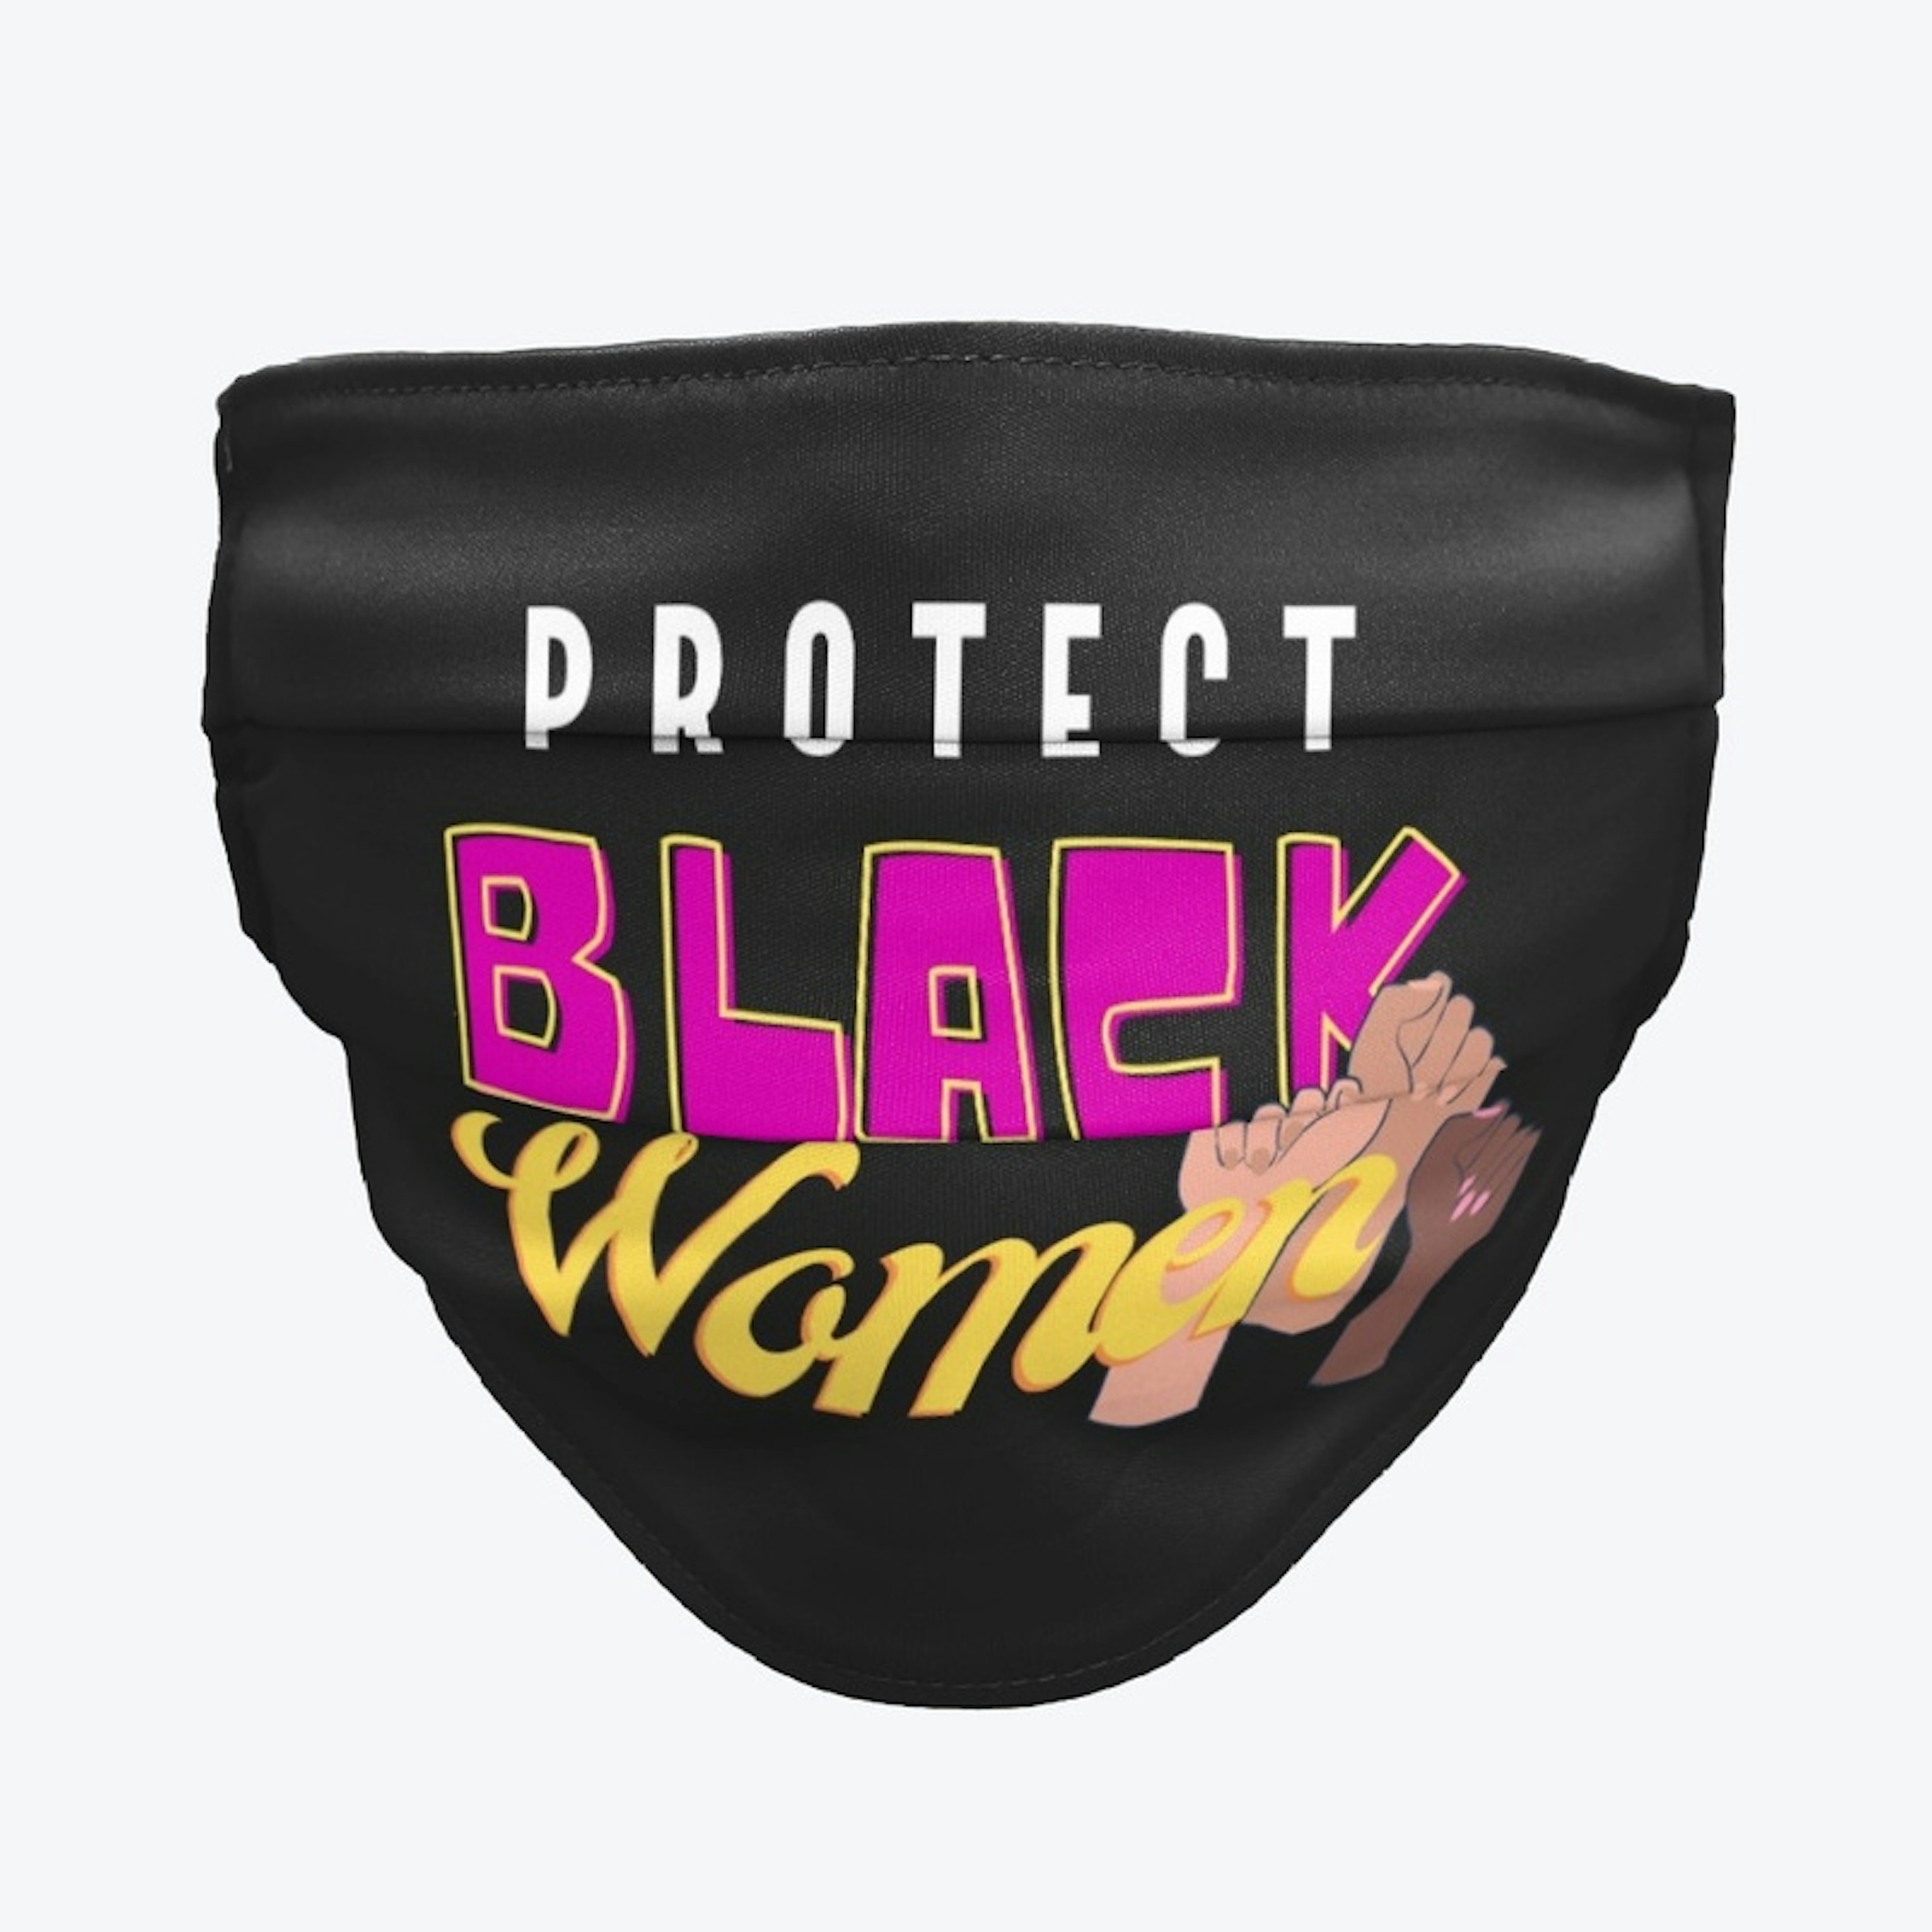 PROTECT BLACK WOMEN Fists